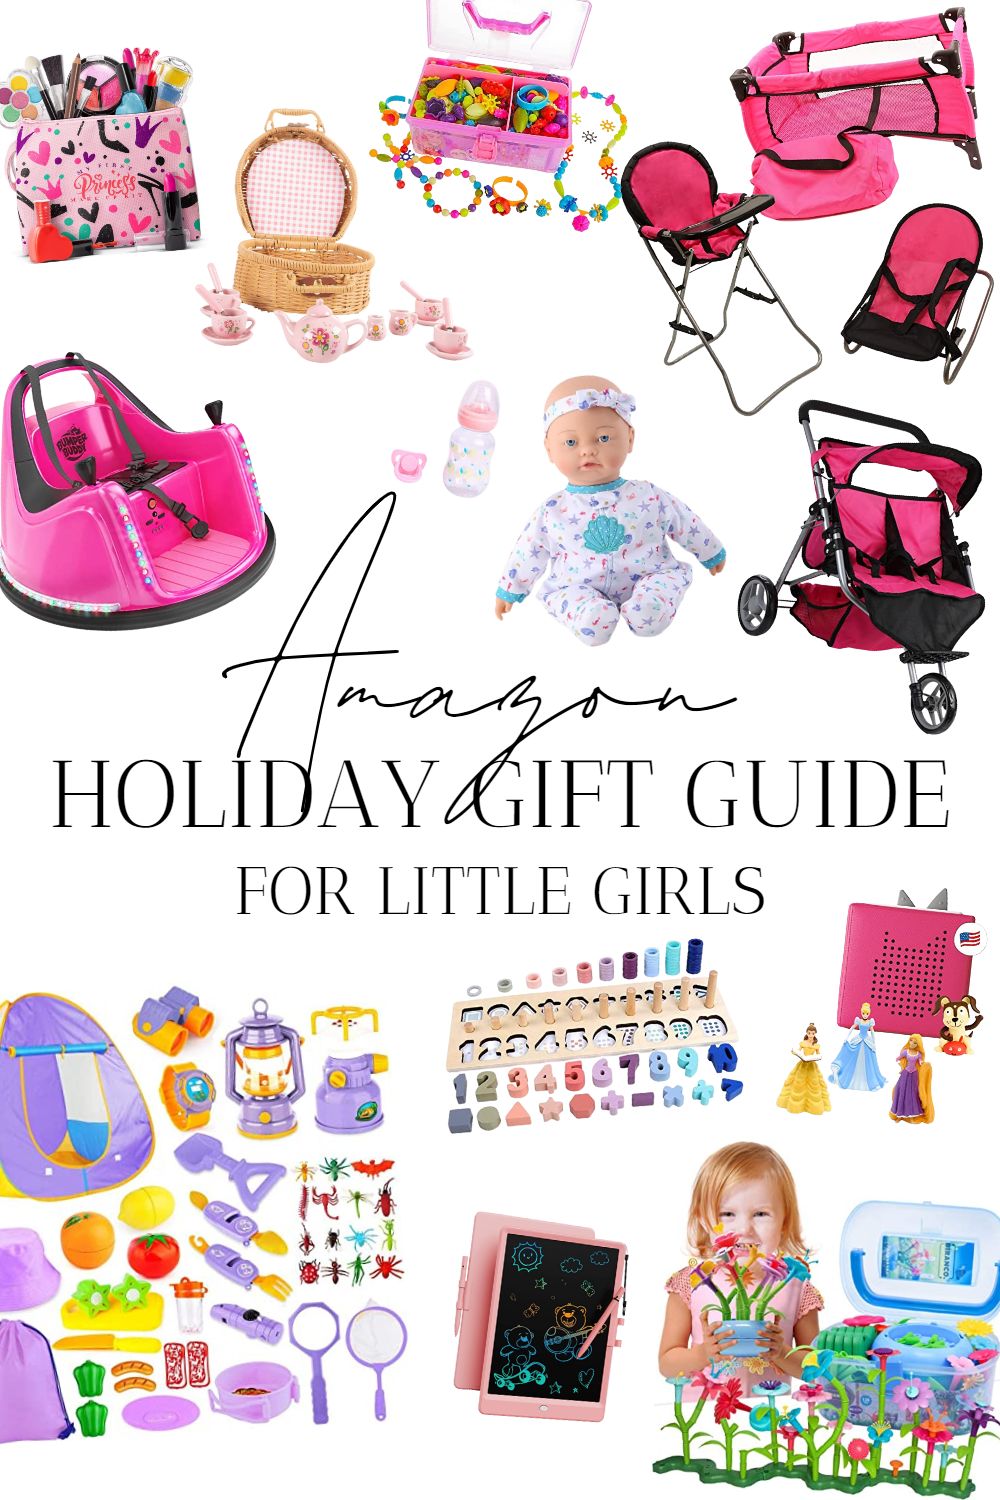 Top Amazon Christmas gifts for girls under the age of ten. Links for our favorite little girls gifts for Christmas 2022. We've built a huge list of our top gifts from Amazon for little girls for the holiday season.